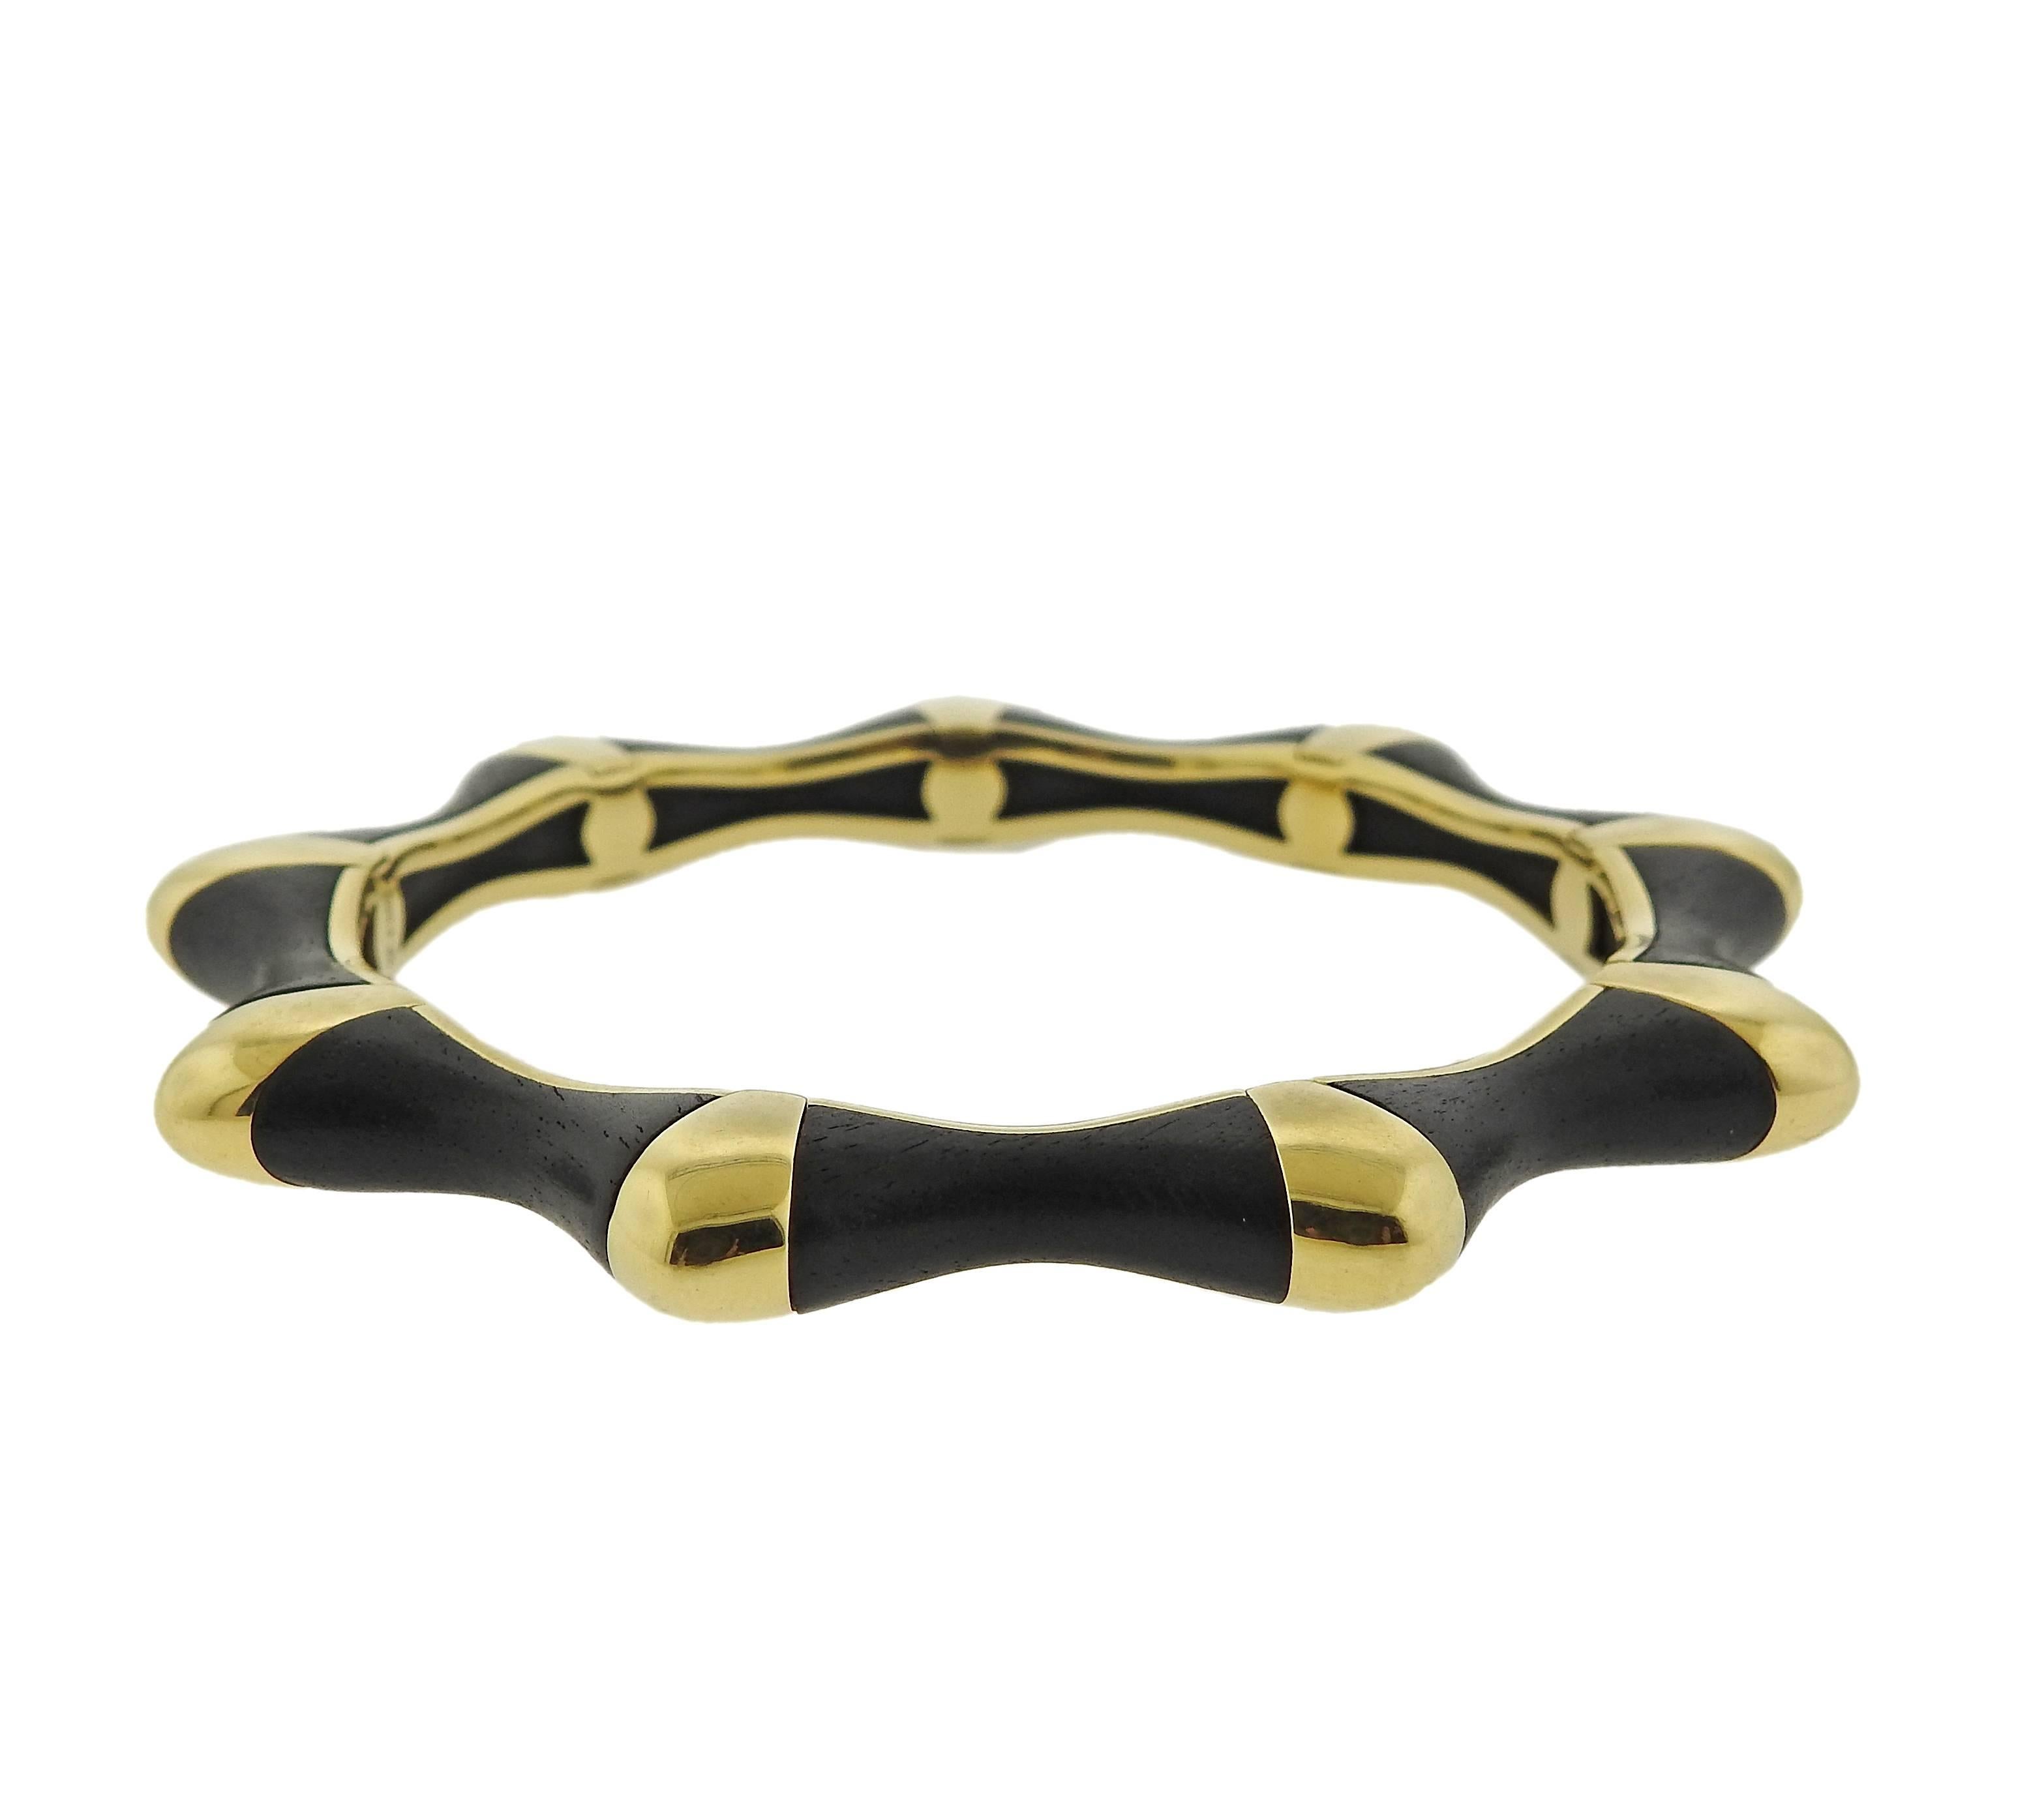 An 18k gold bangle bracelet, decorated with ebony. Crafted by David Webb, Inner diameter of the bangle is 2 7/16